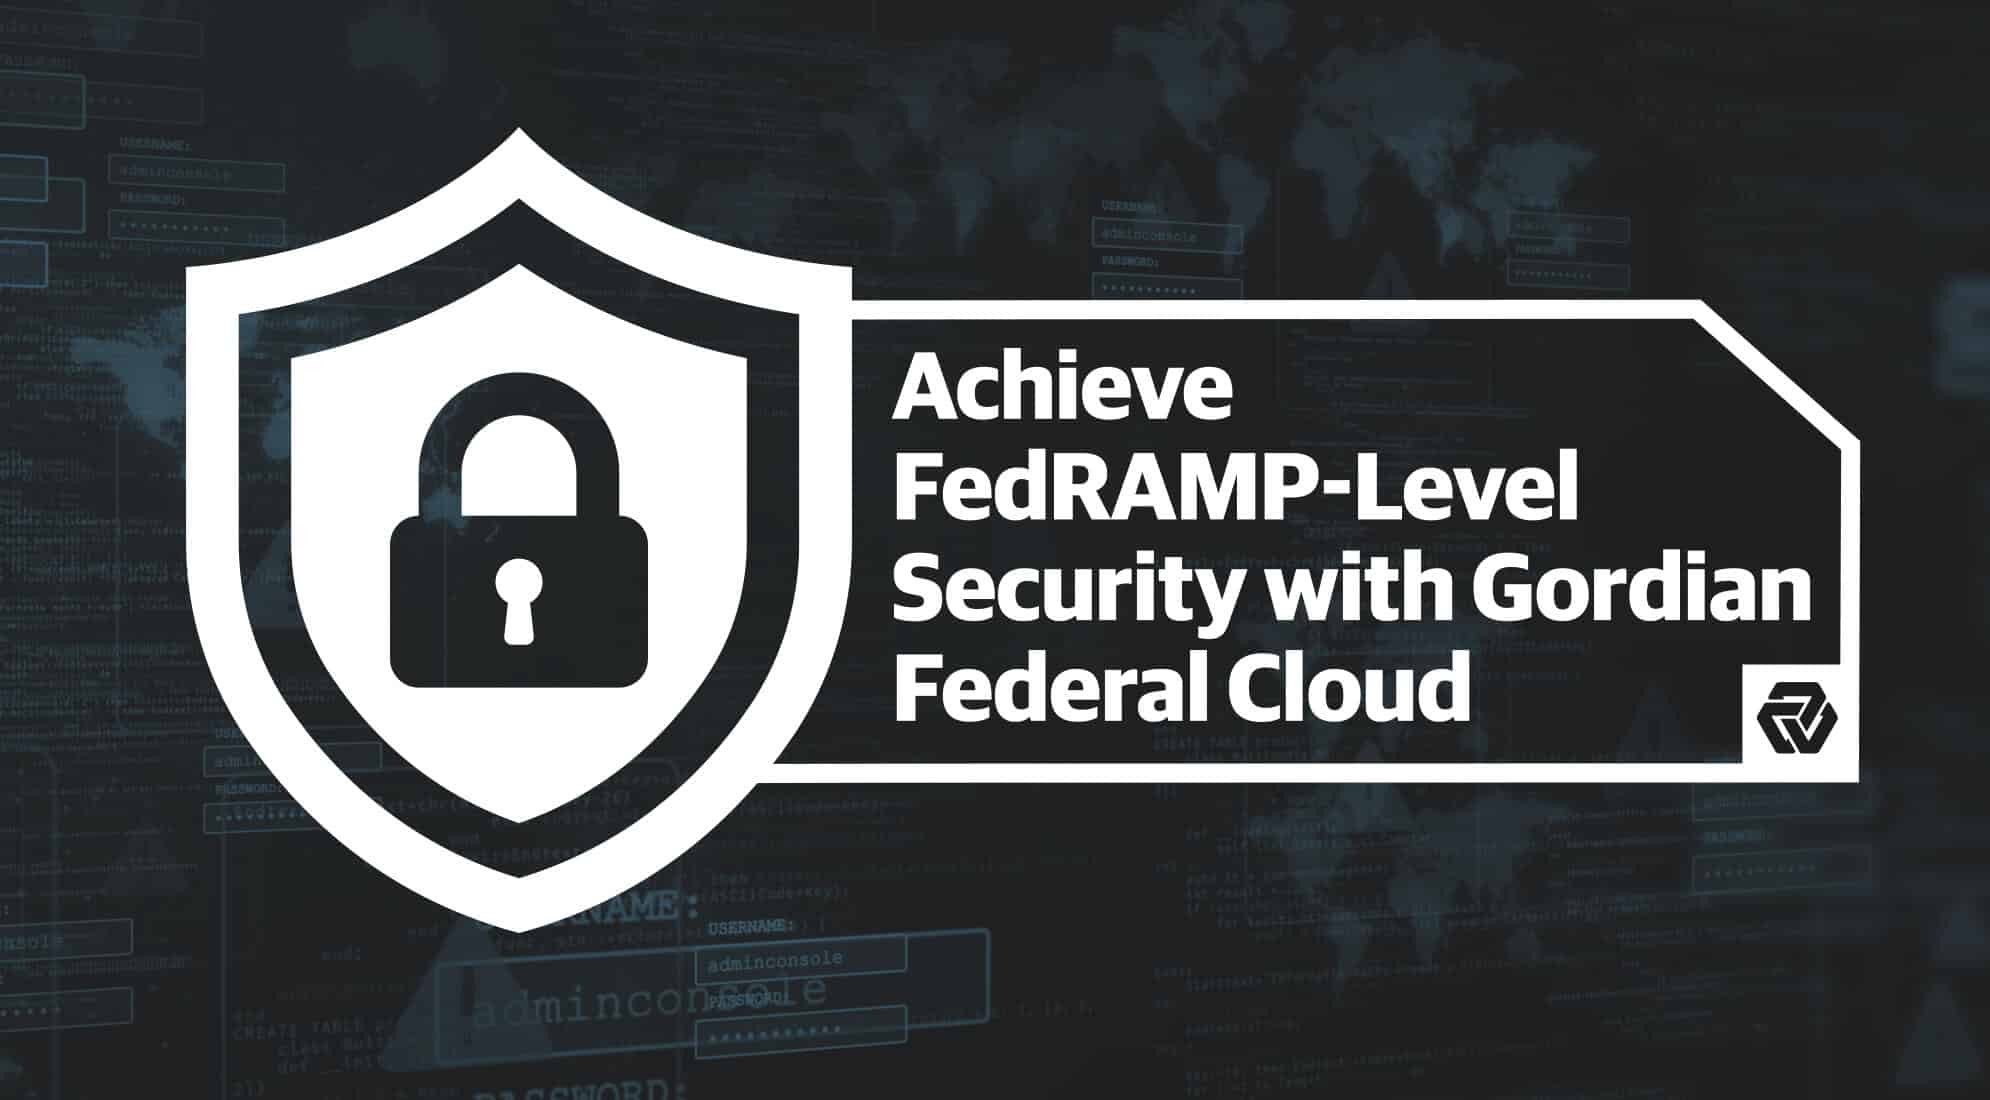 Achieve FedRAMP-Level Security with Gordian Federal Cloud 2